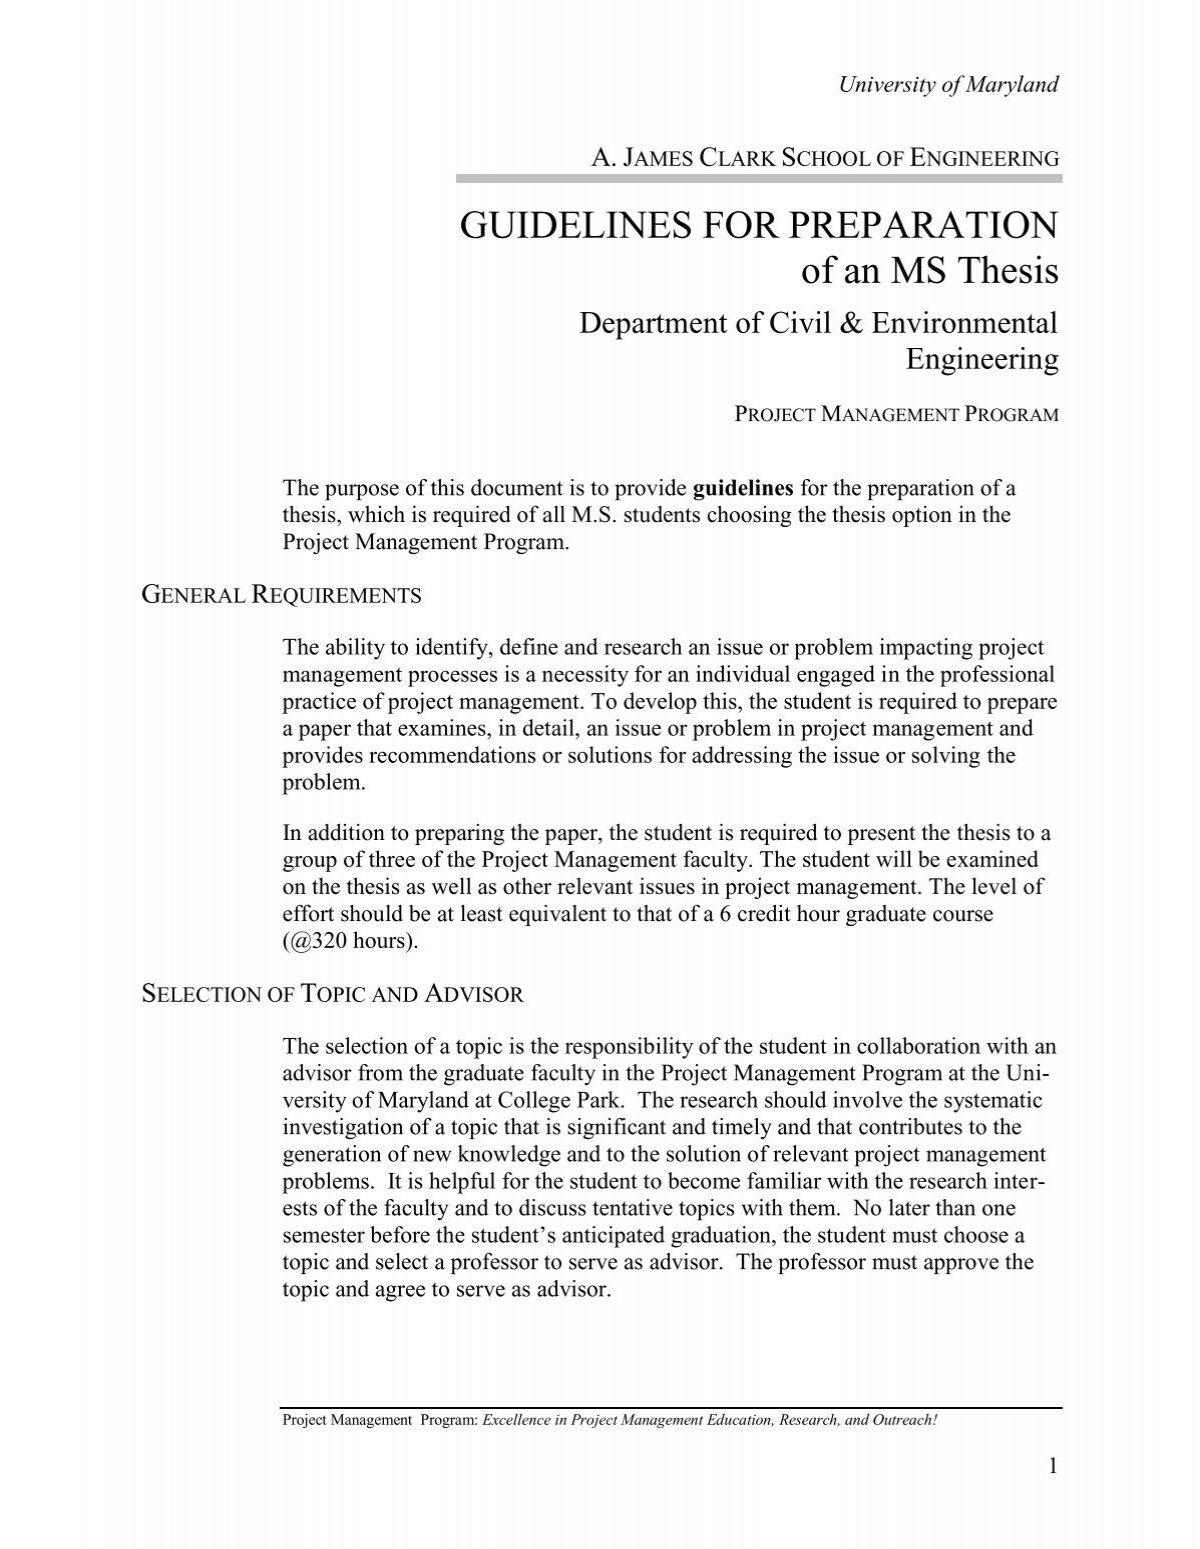 hda master thesis guidelines